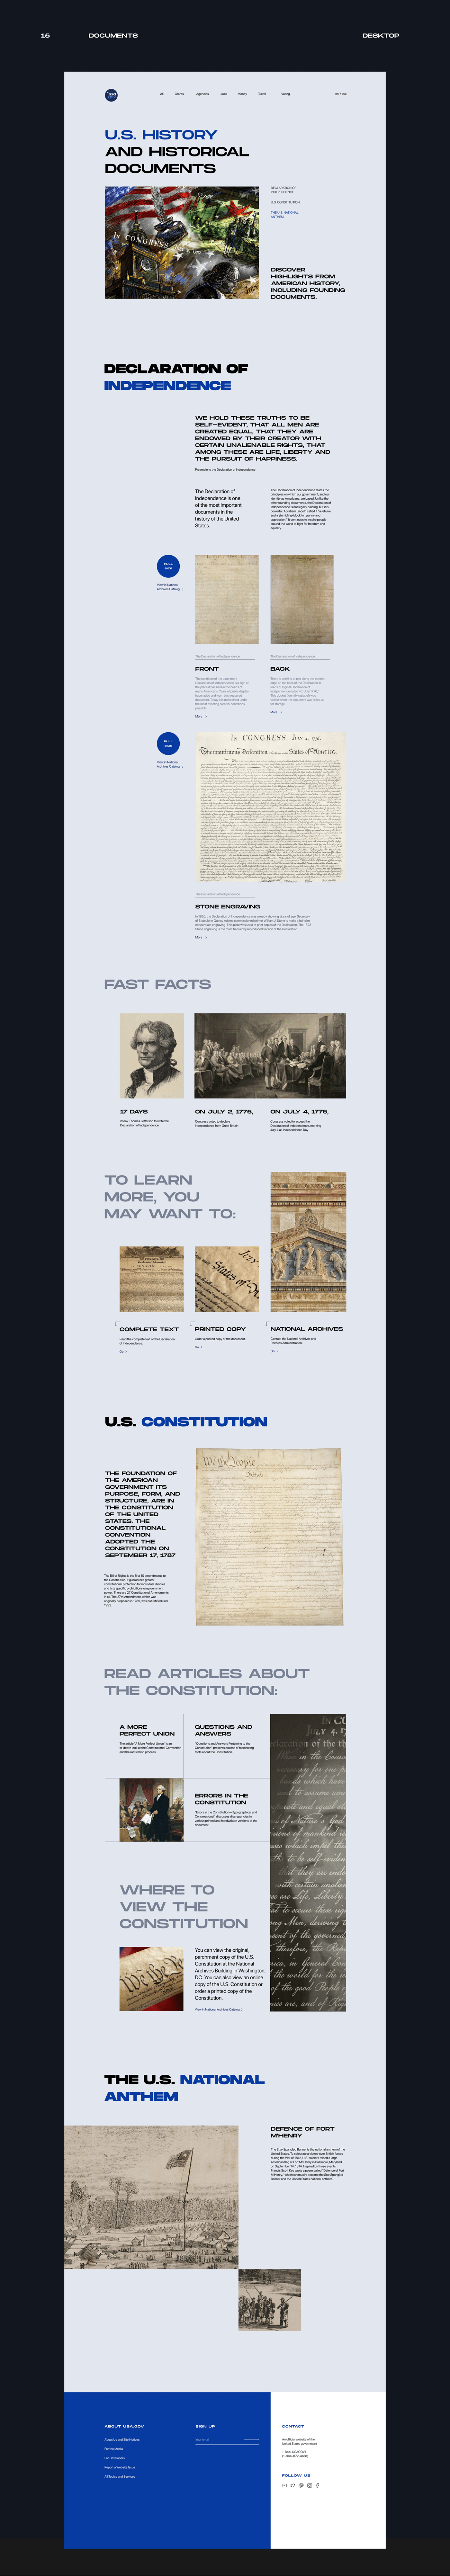 concept Government official redesign united states USA.gov Website